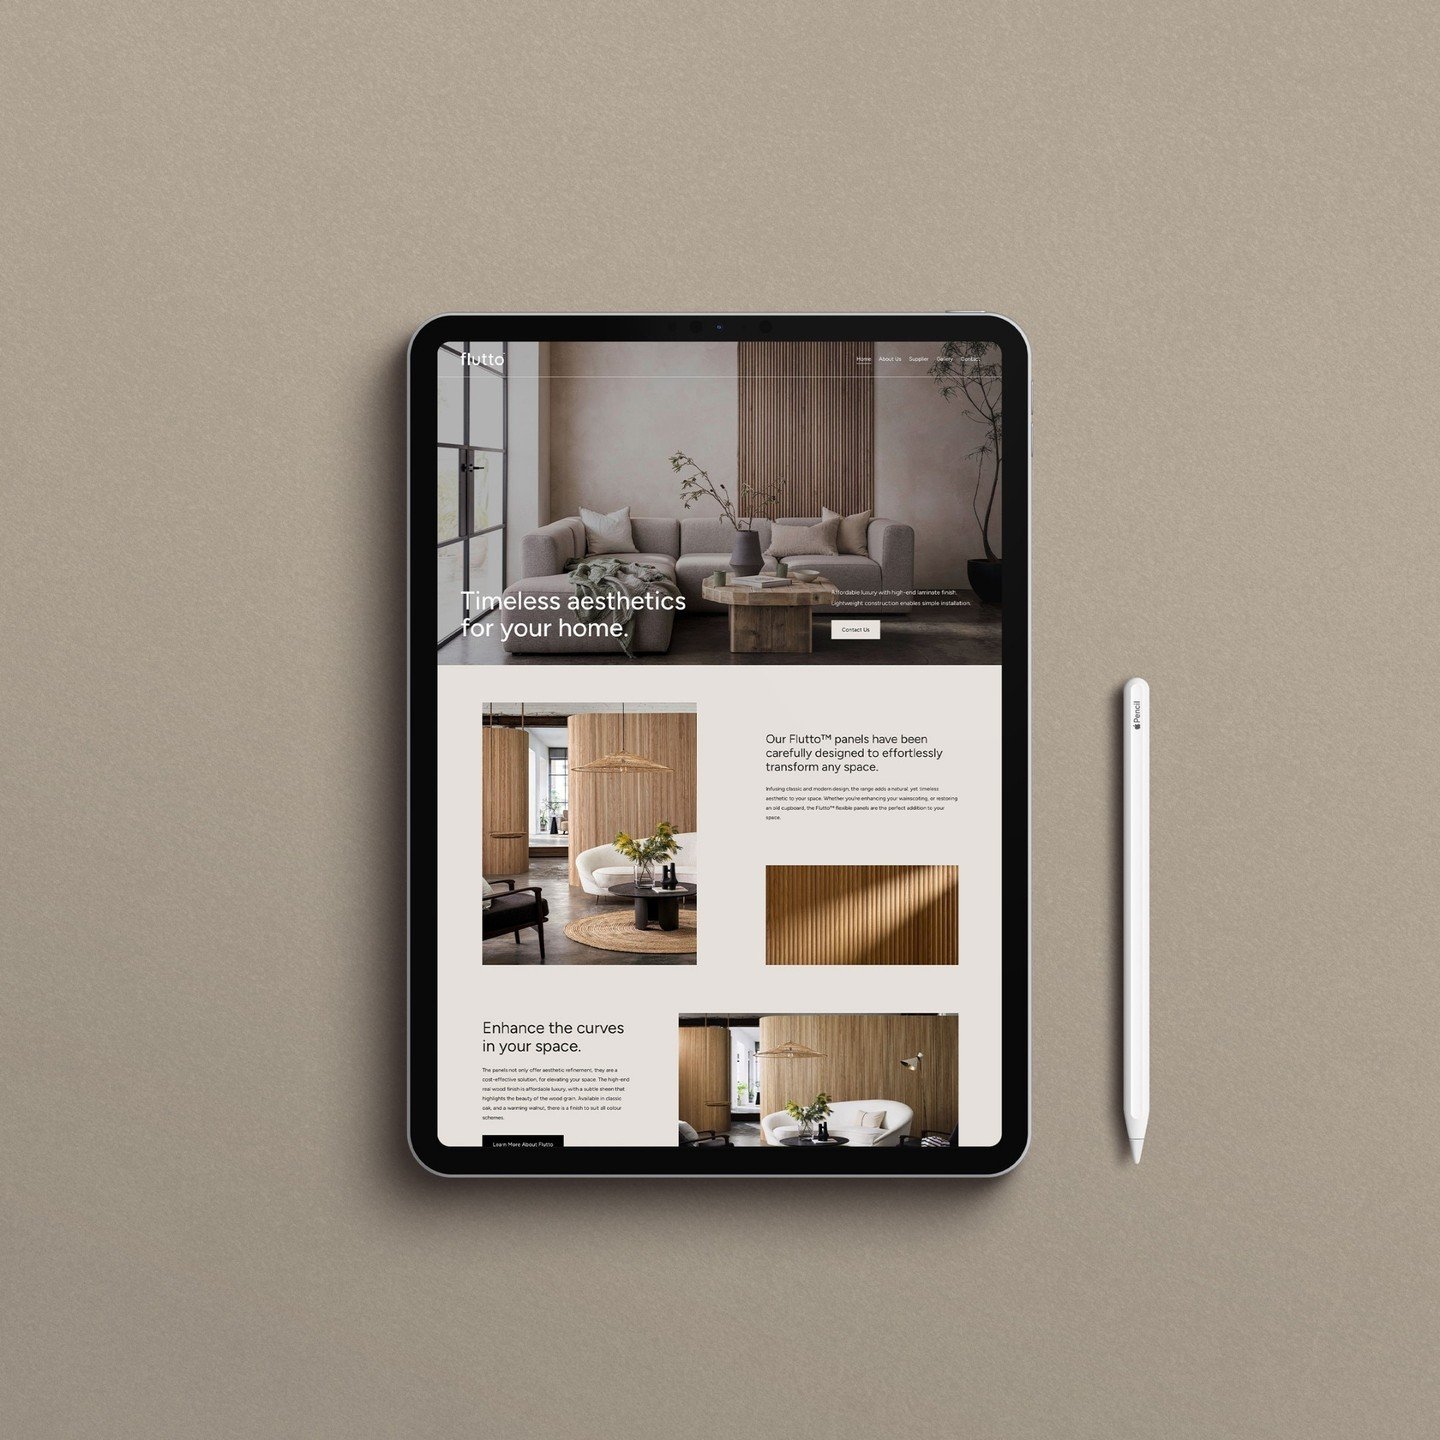 We feel extremely lucky to have worked with some beautifully talented people over the years, and this project was no exception. ⁠
⁠
We were tasked to create a website design for Flutto, that showcased their timeless and modern style. We work a lot wi